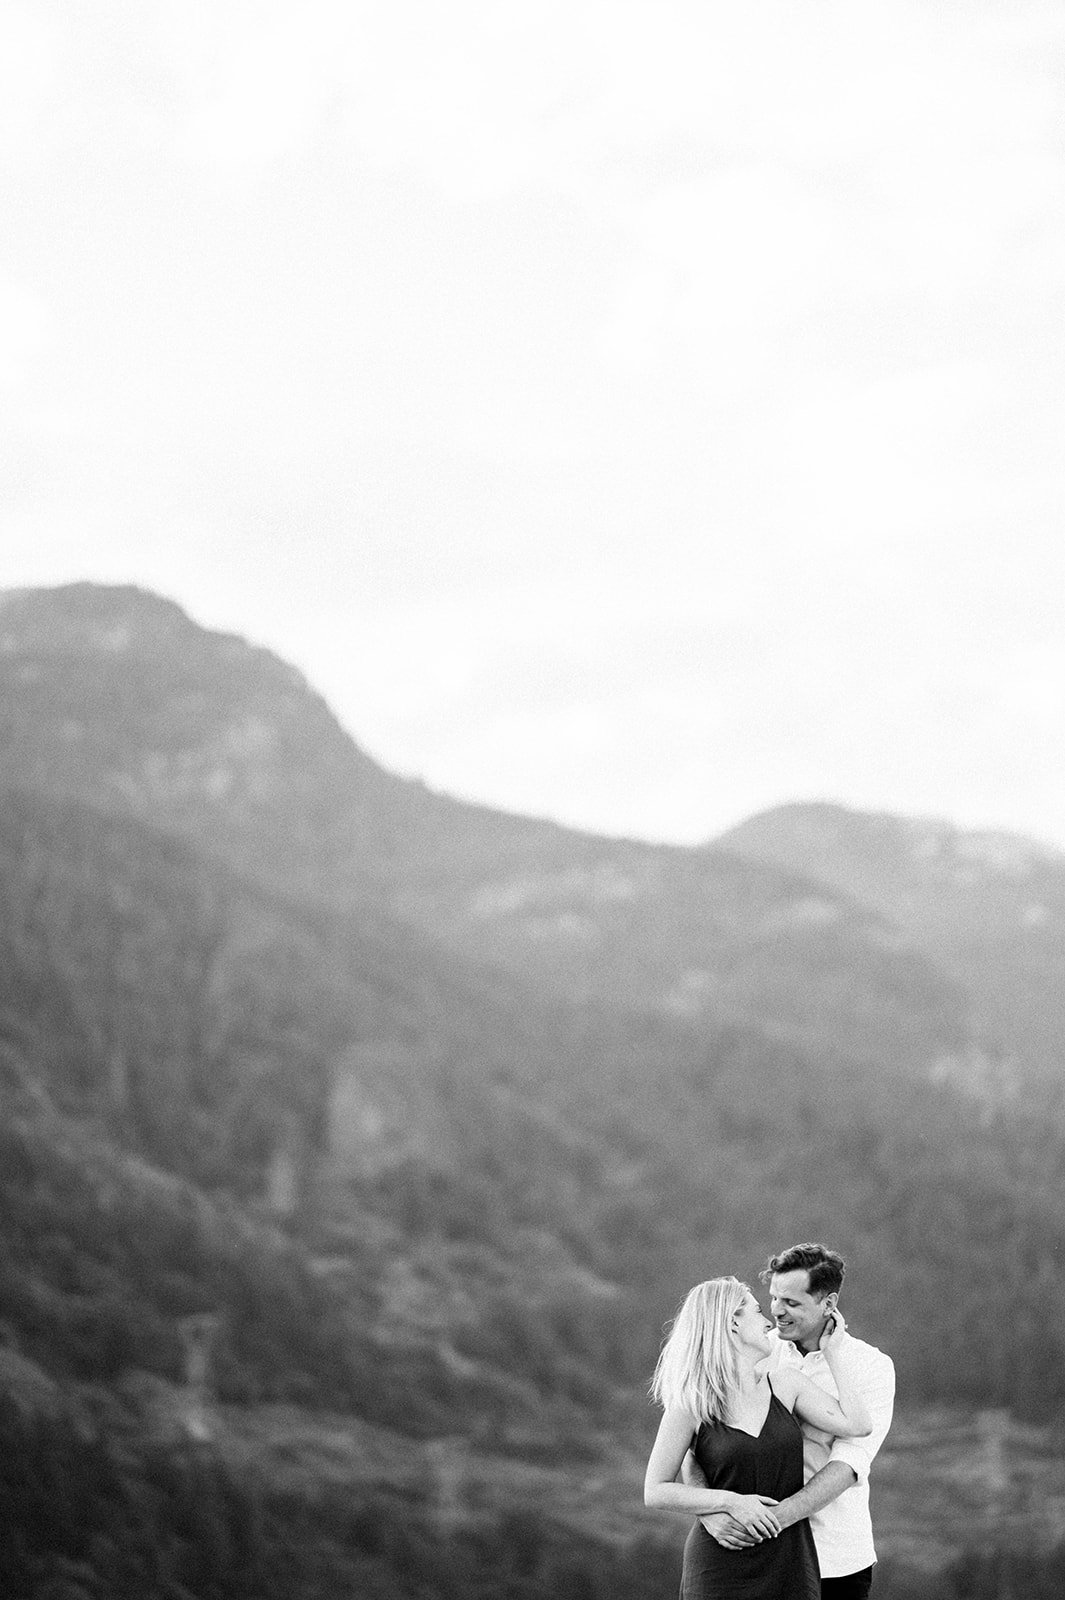 A man lovingly embraces his fiancee from behind as she stroked his hair in front of and emerald green mountain.